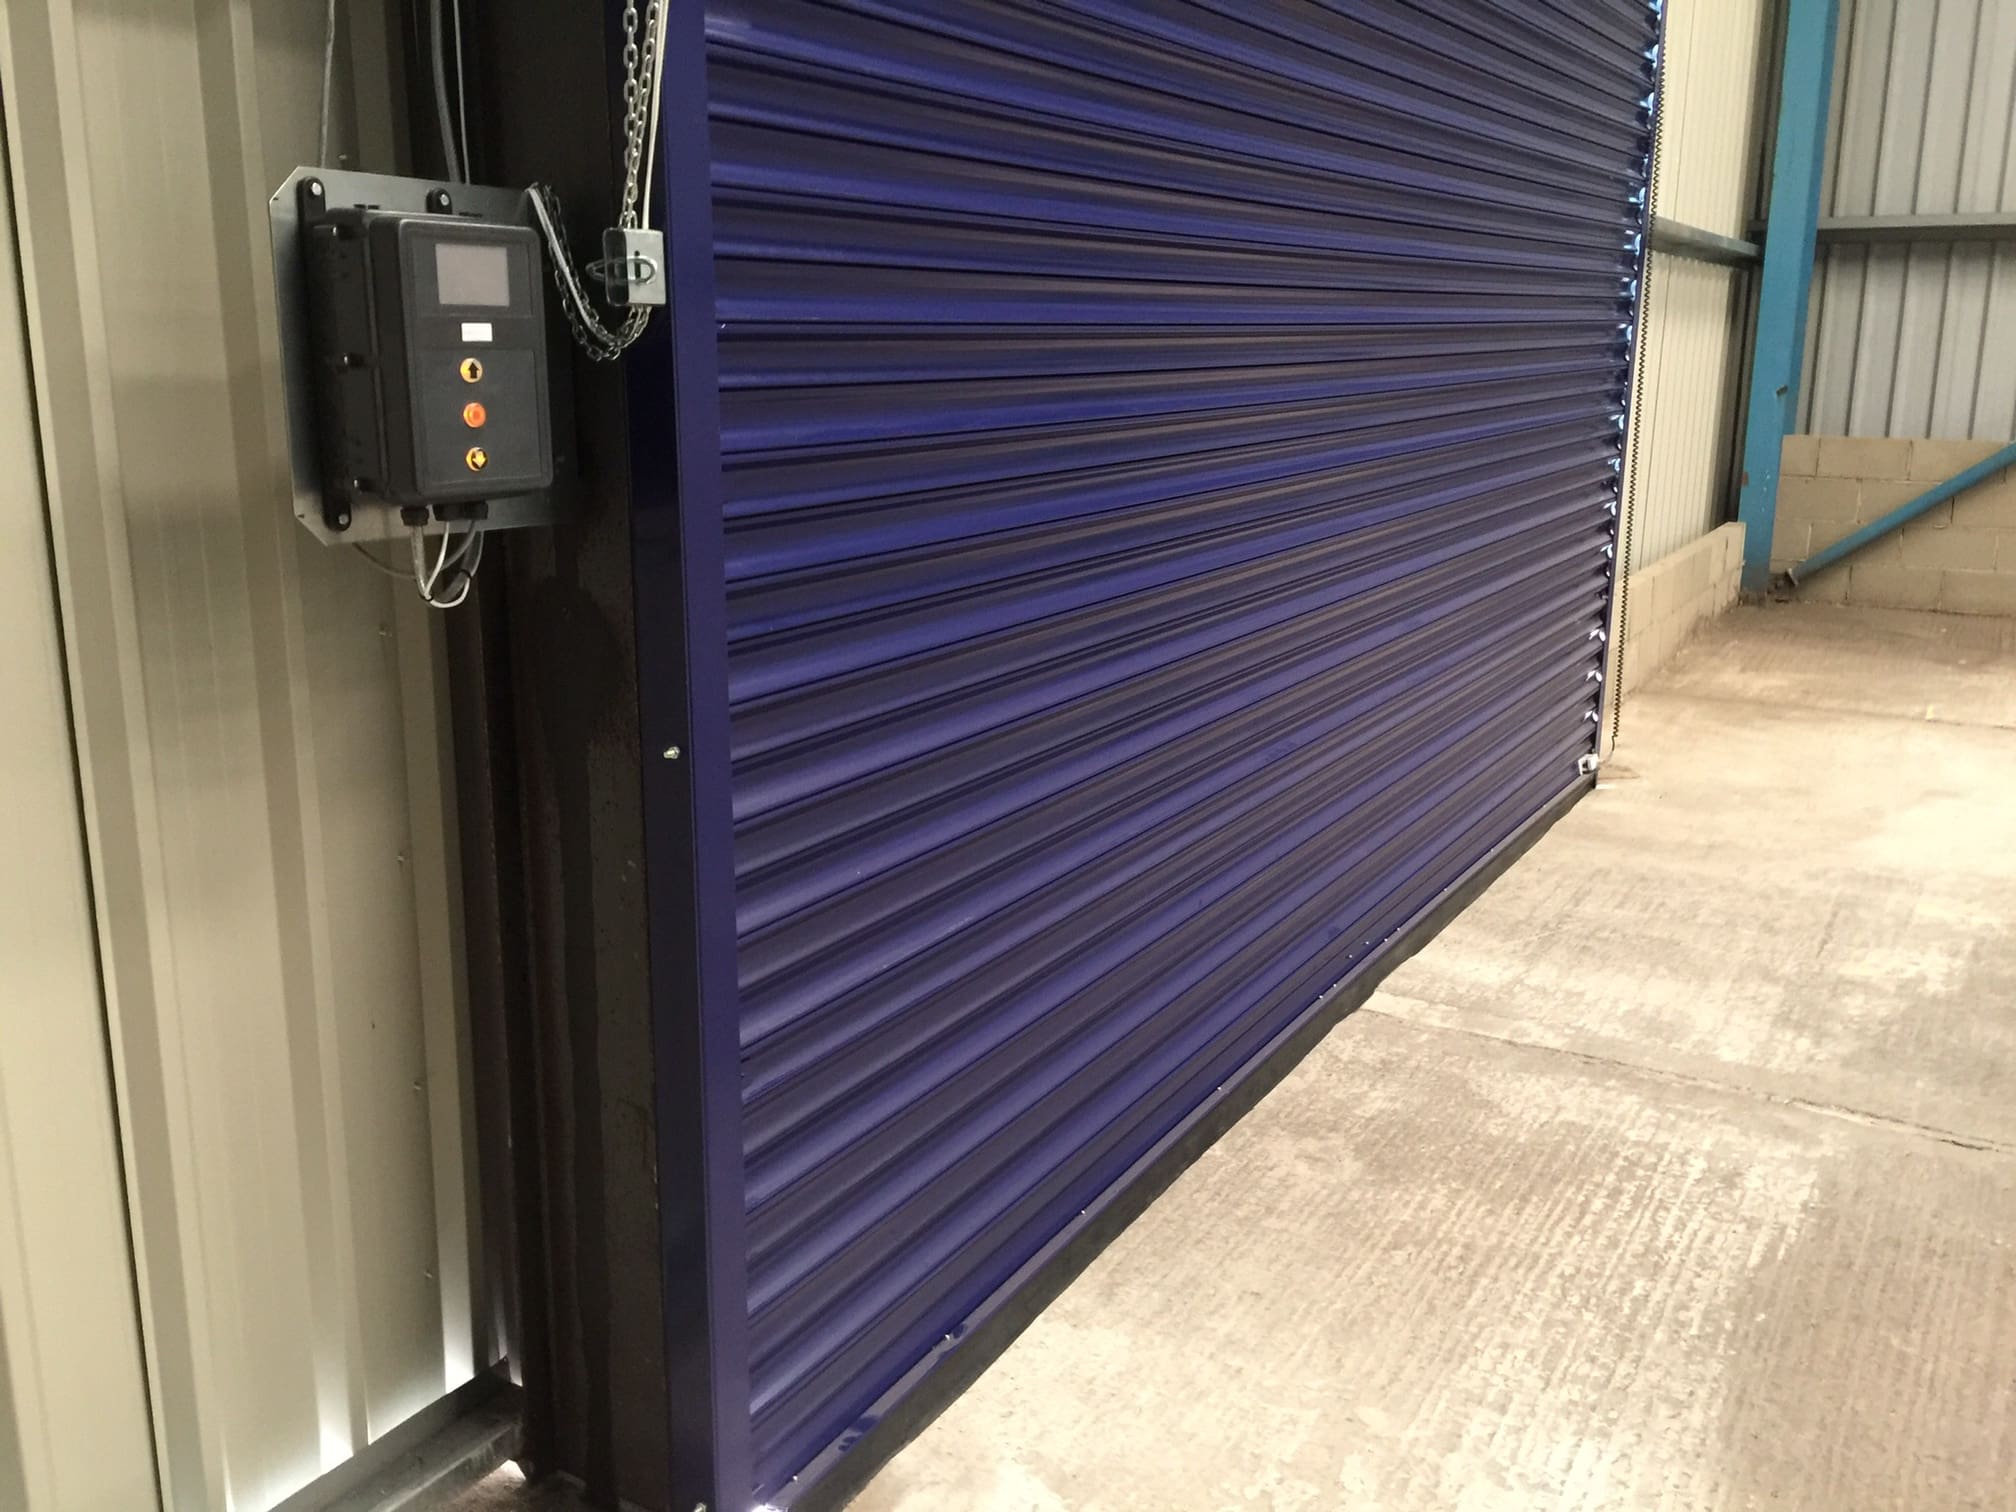 Images C & S Roller Shutter Systems